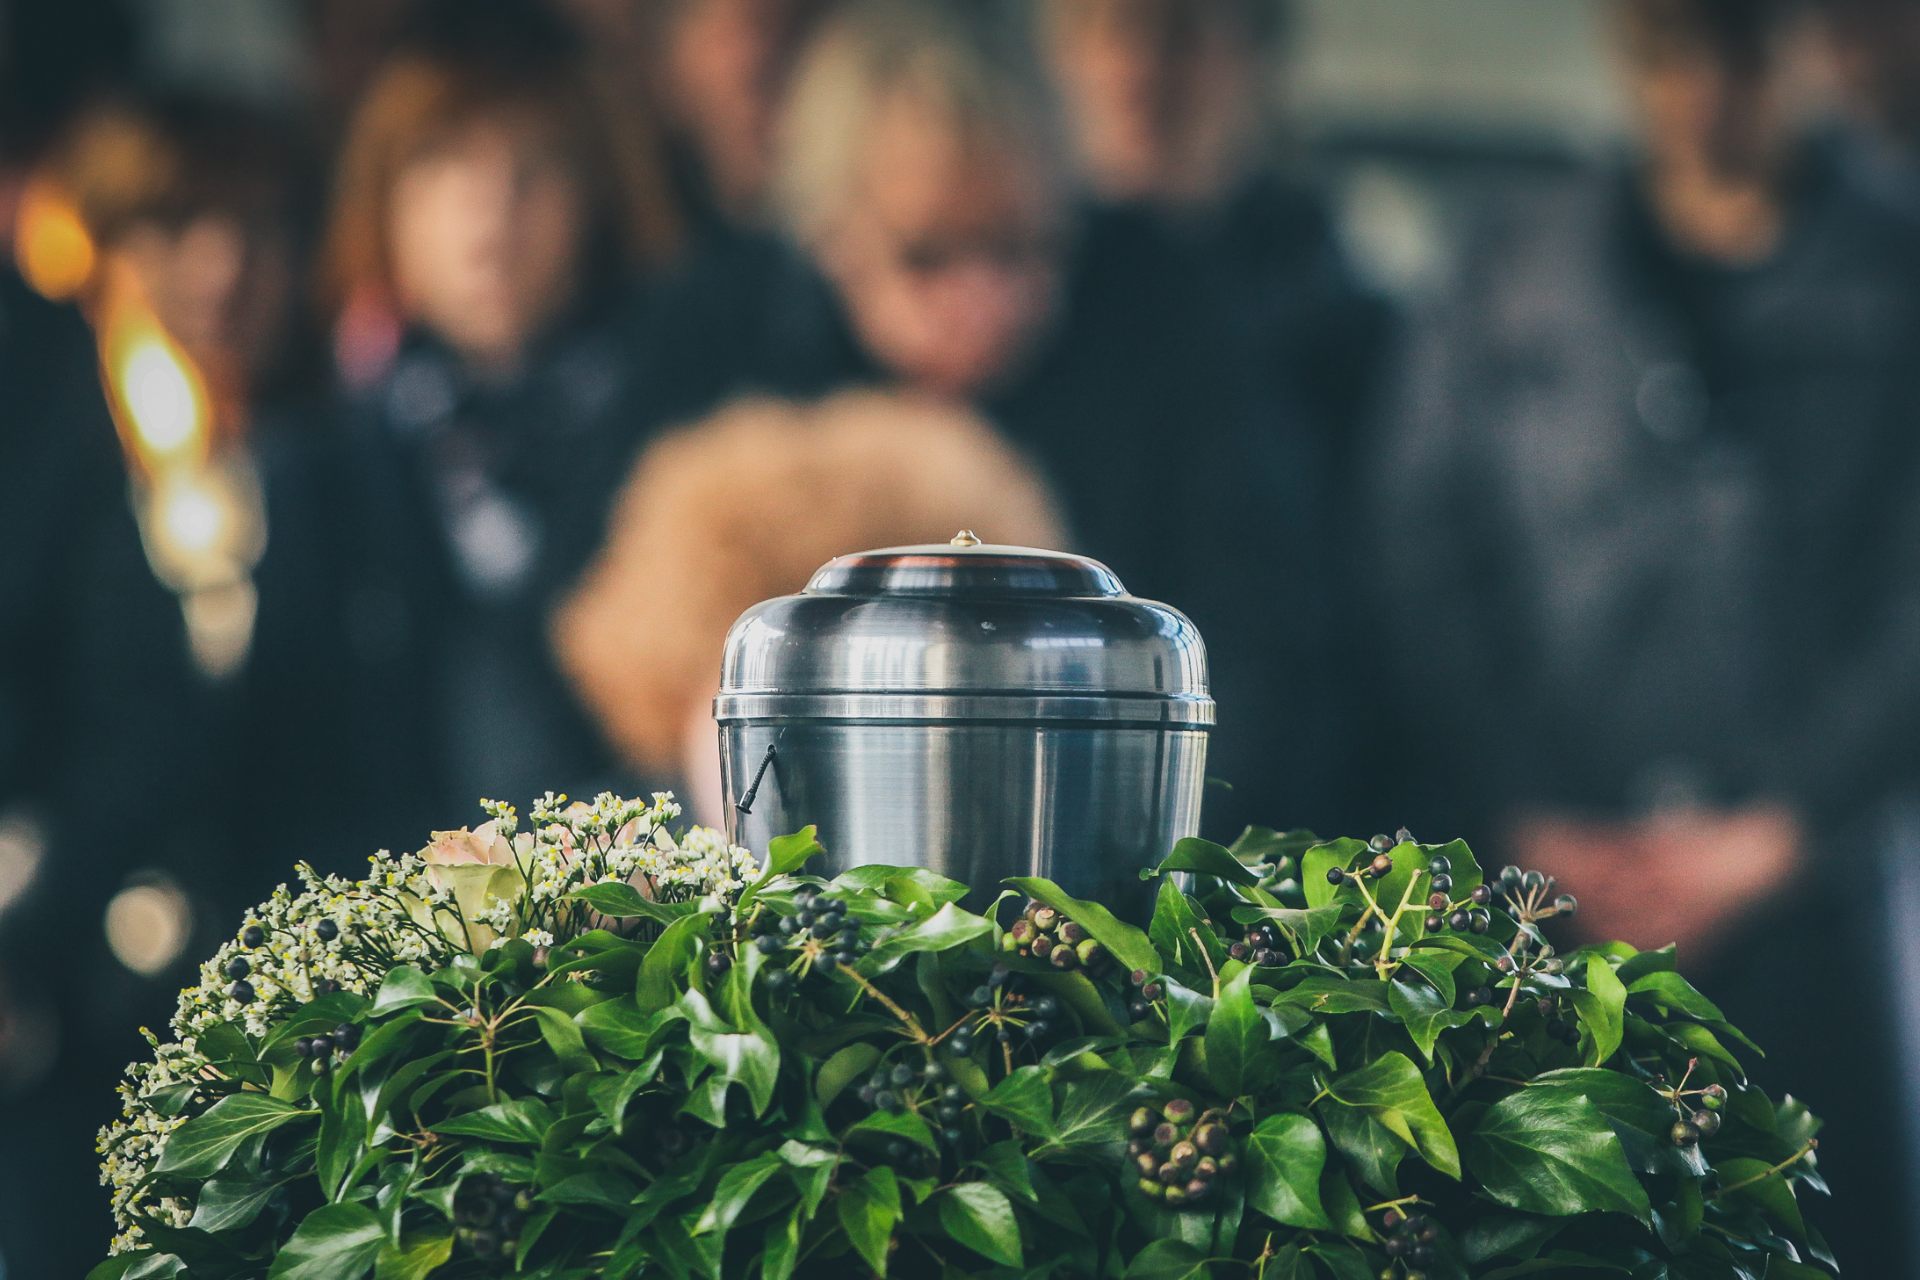 The Rise of Cremation: Funeral disposition of choice